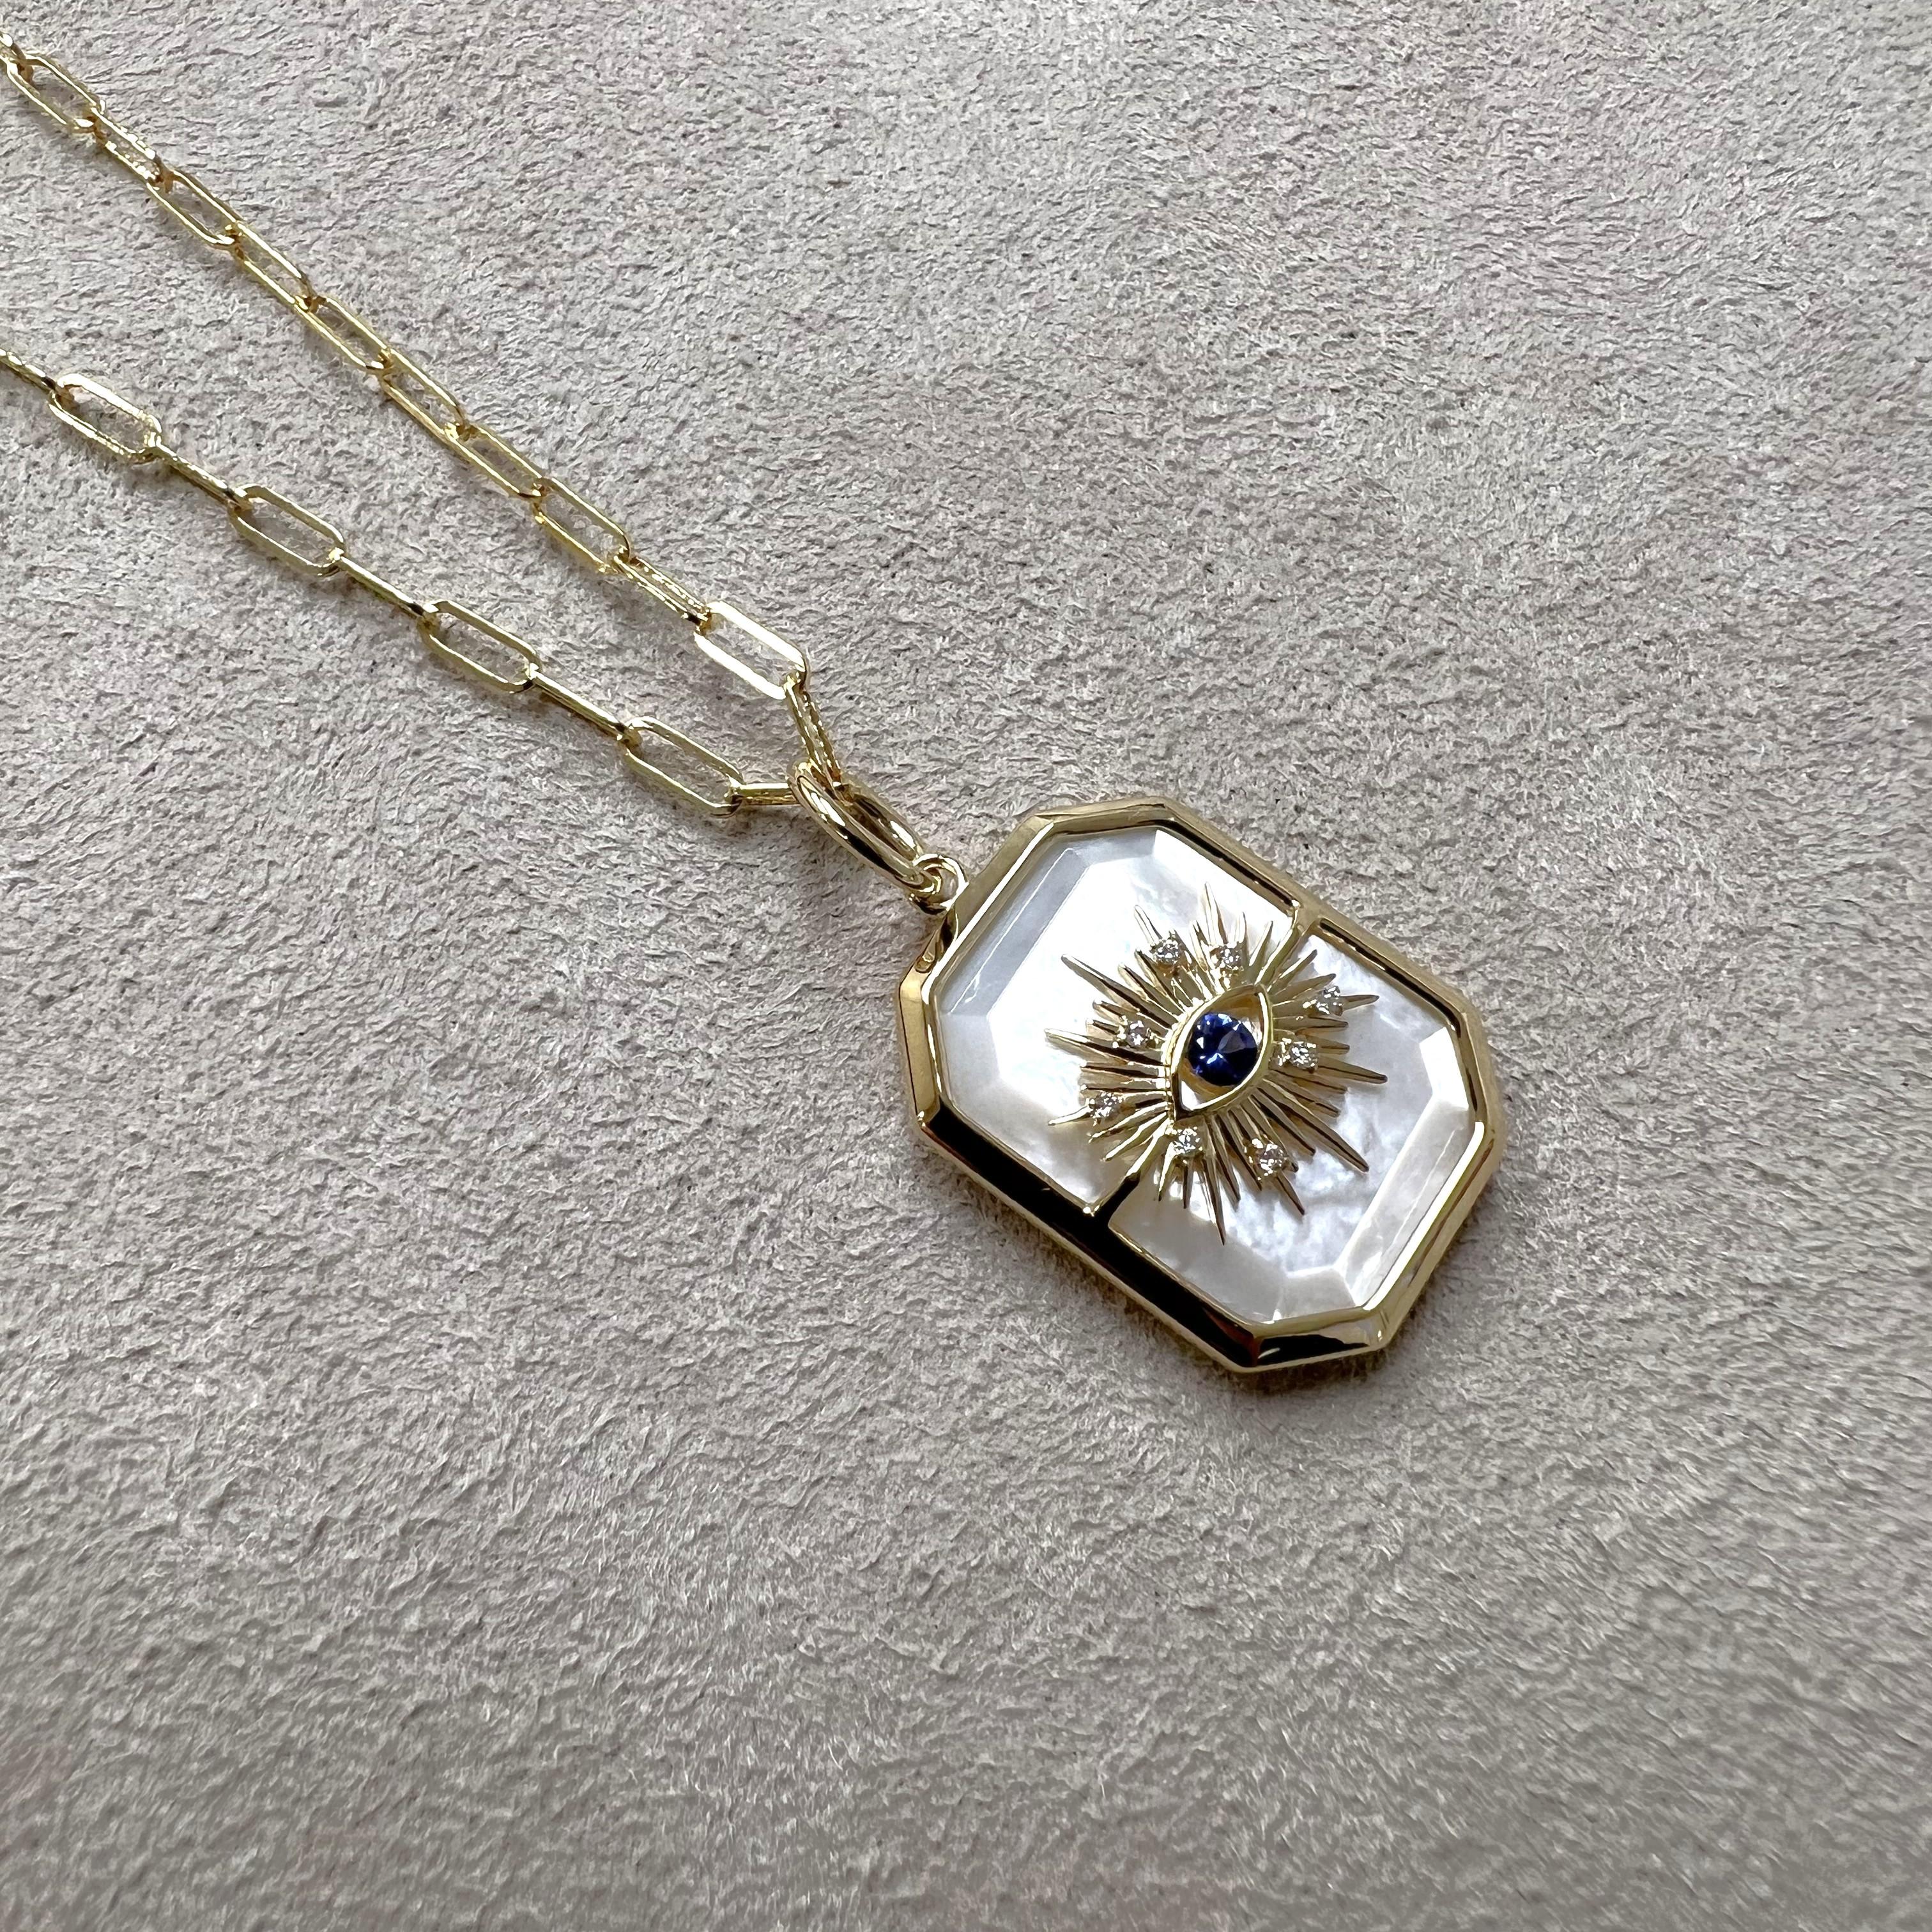 Created in 18 karat yellow gold
Mother of Pearl 12 carats approx.
Blue sapphire 0.10 carat approx.
Diamonds 0.03 carat approx.
Chain sold separately
Limited Edition

Crafted from 18 karat yellow gold, this luxurious limited-edition pendant features